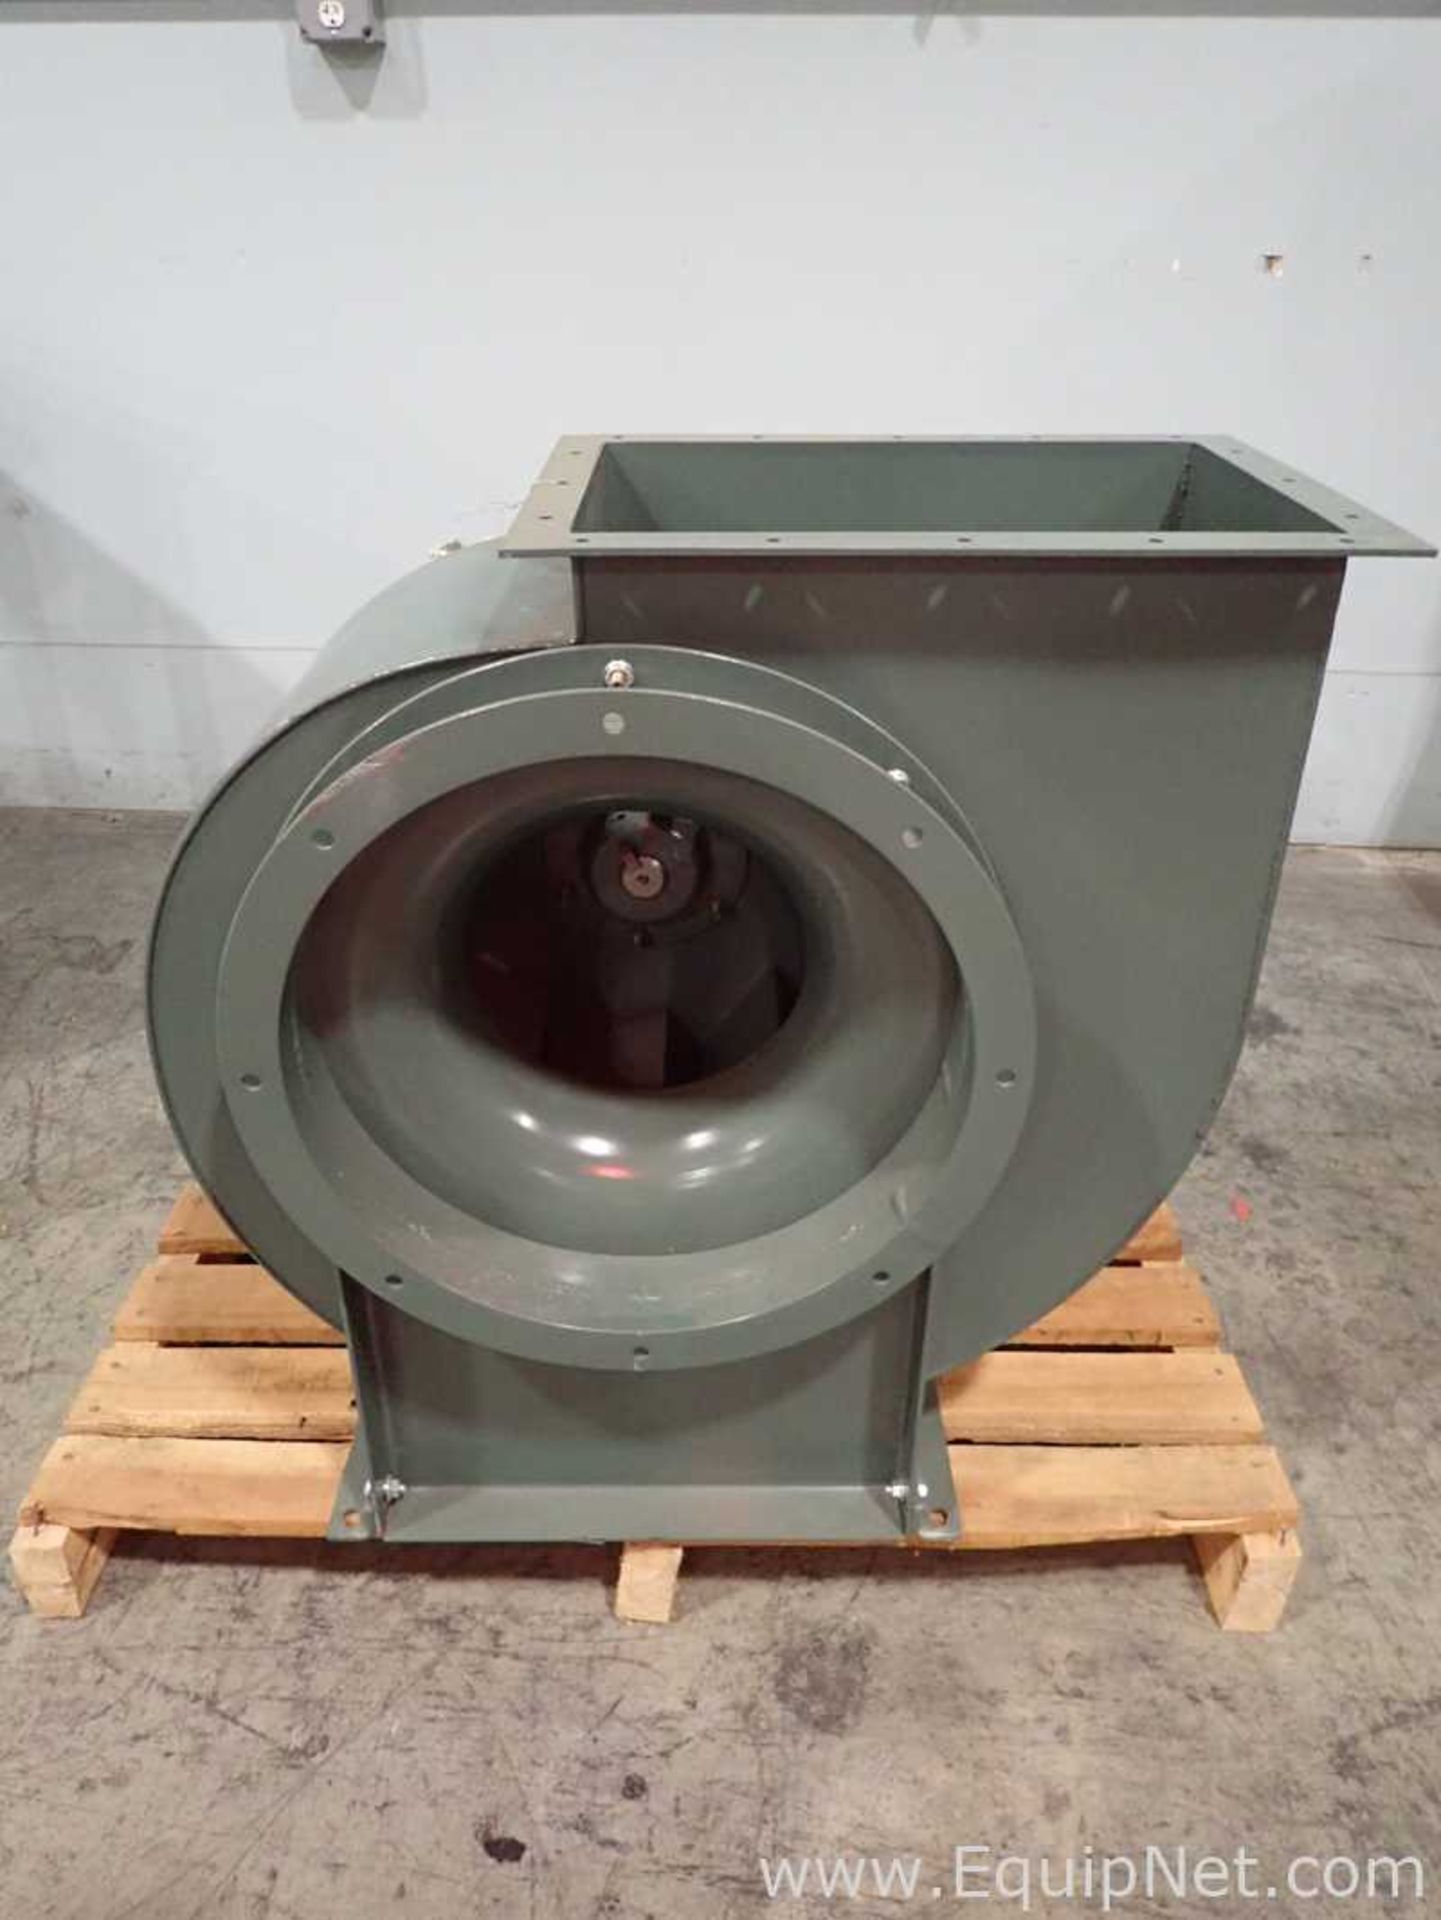 EQUIPNET LISTING #793272; REMOVAL COST: $25; DESCRIPTION: Unused New York Blower General Purpose